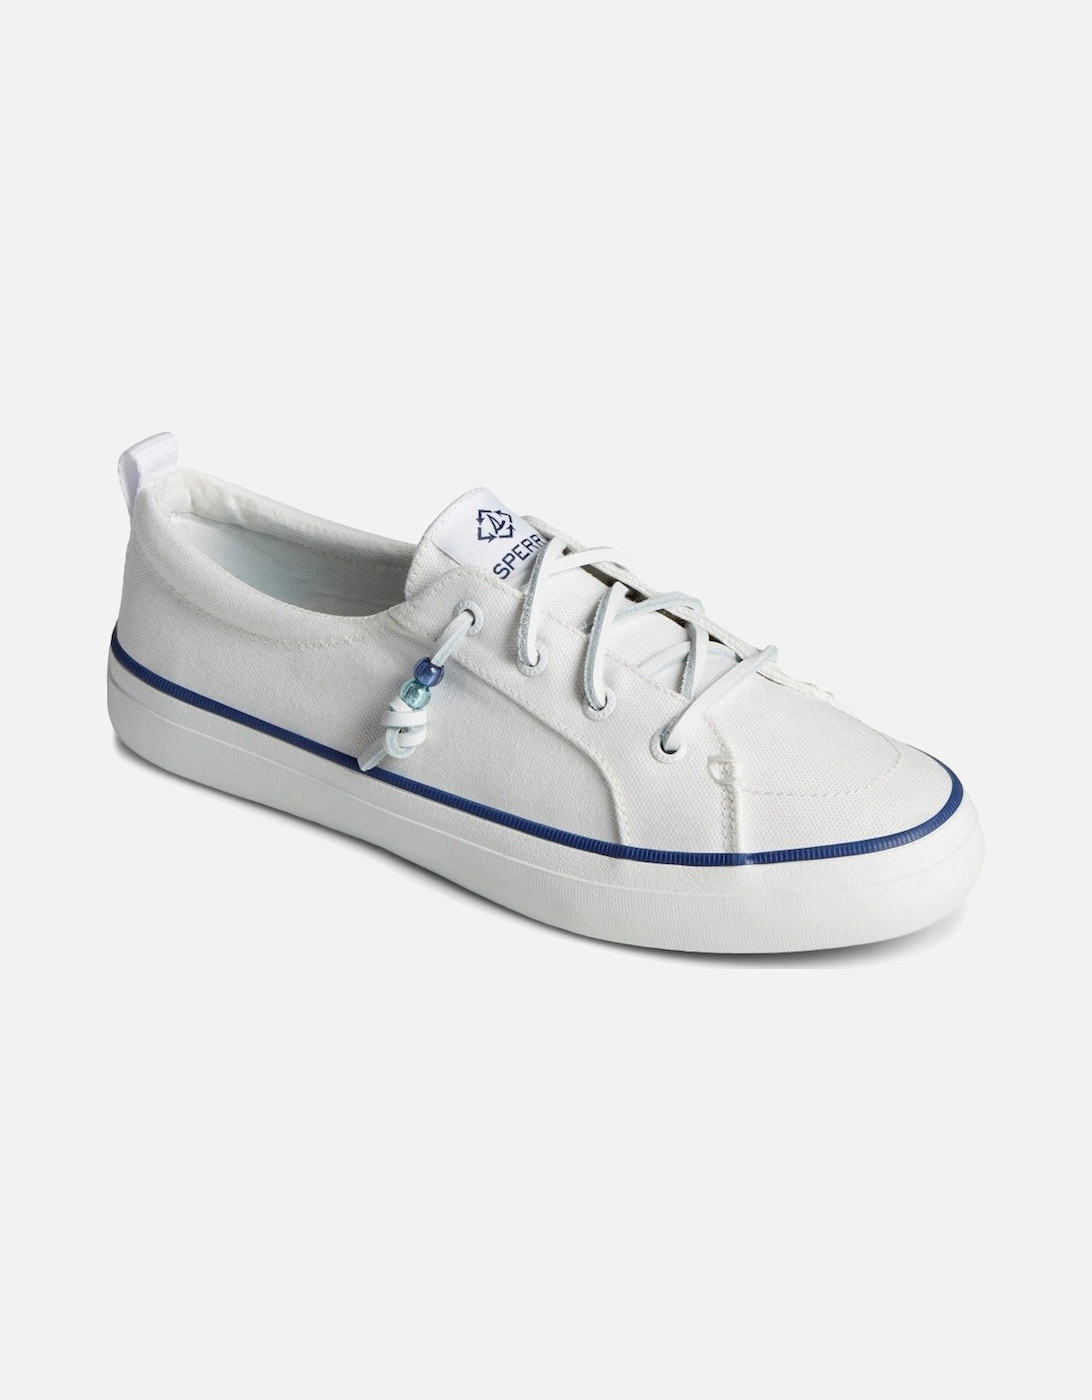 Crest Vibe Womens Shoes